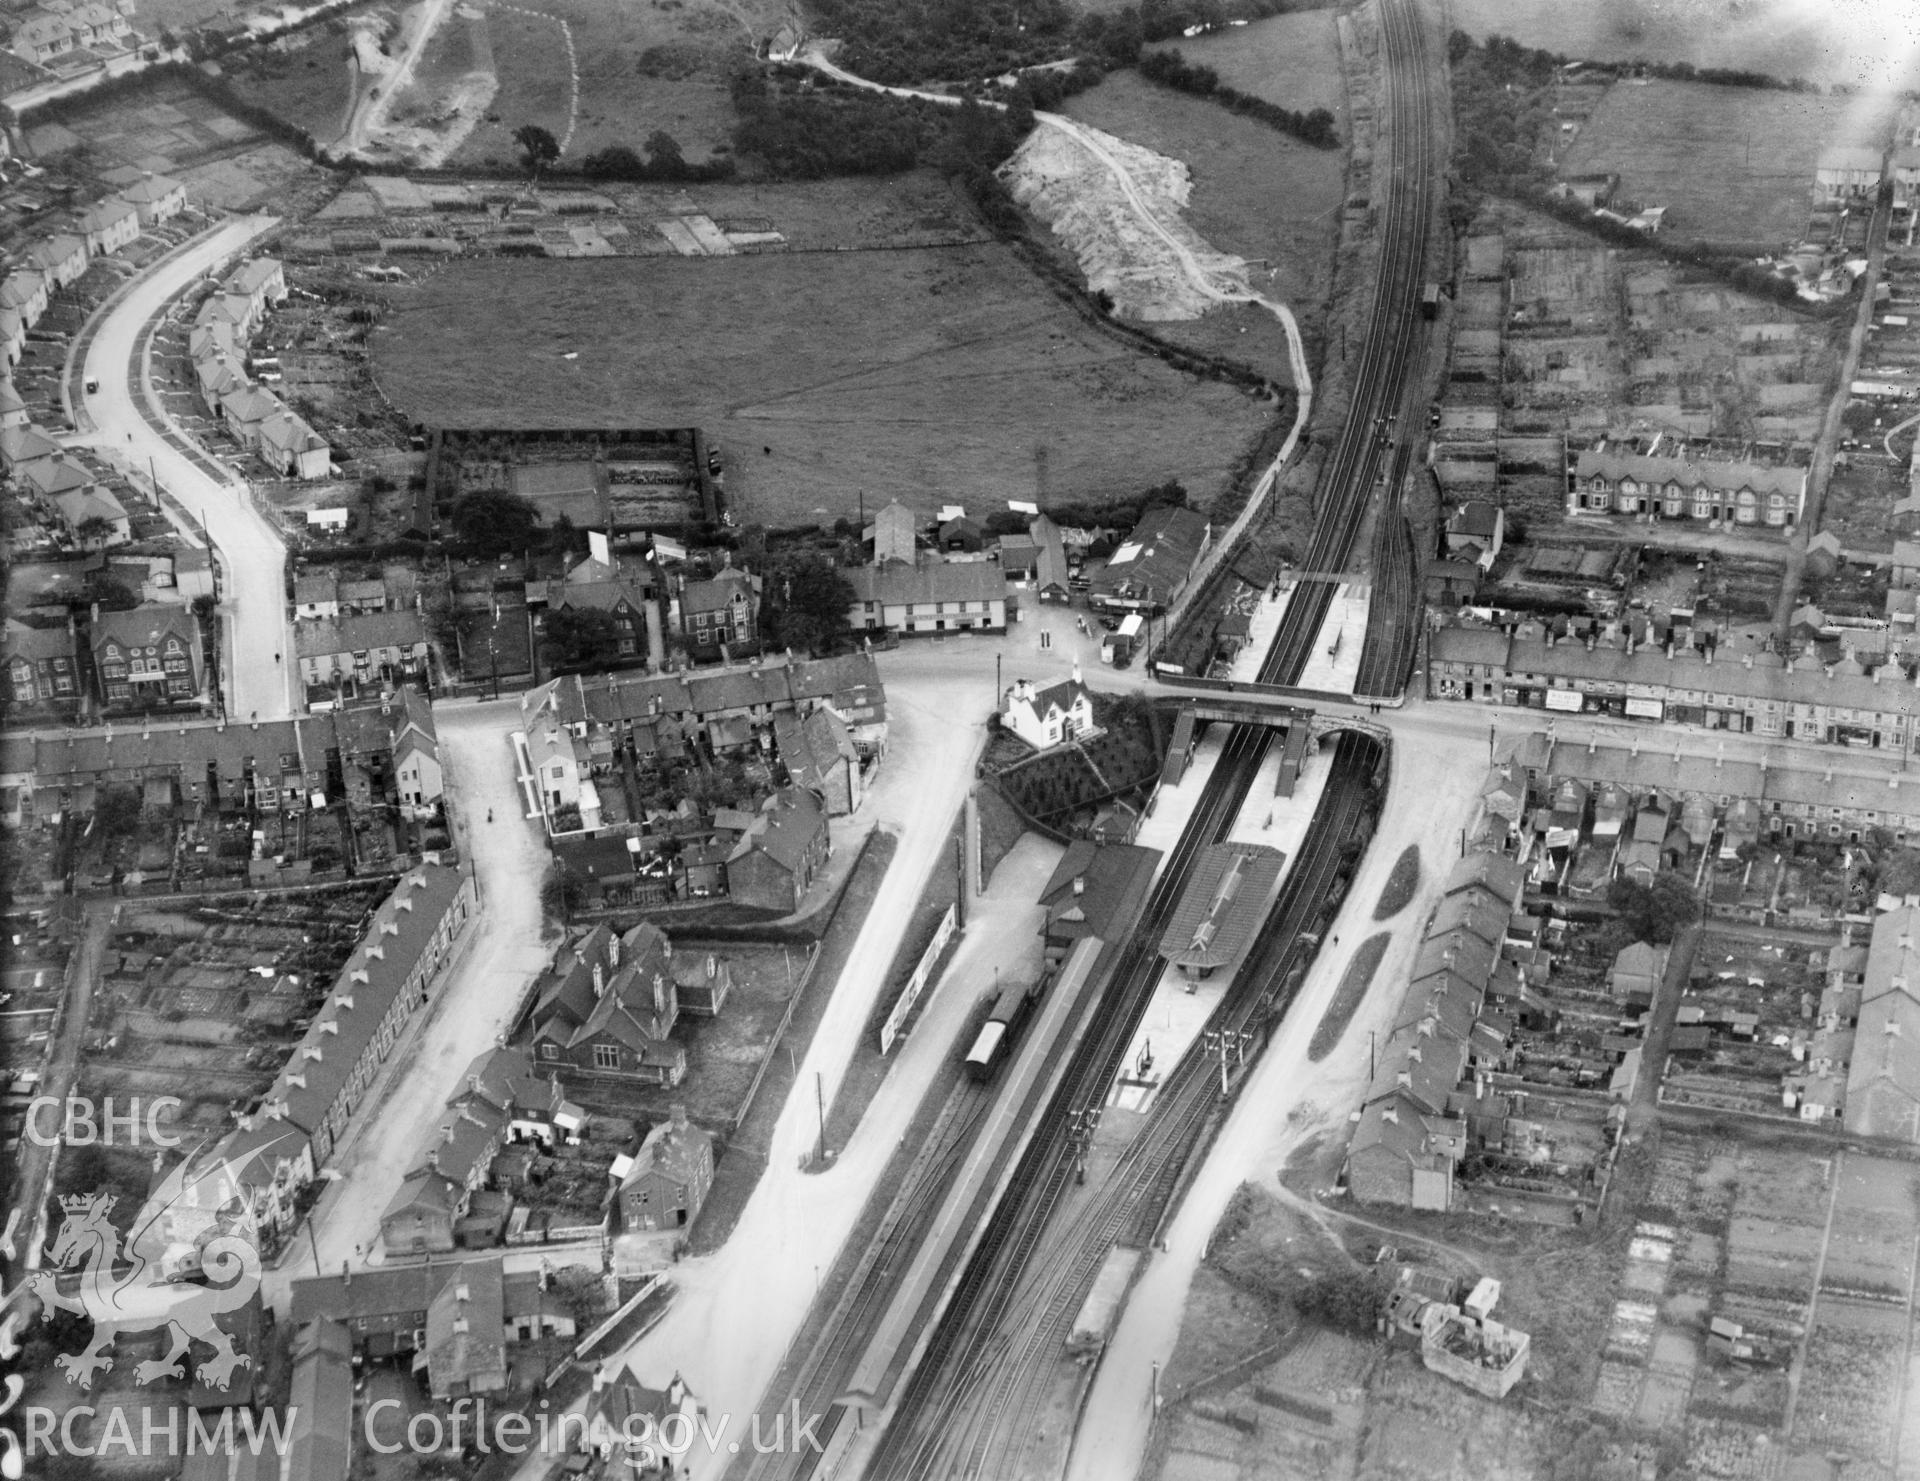 View of Llantrisant station, Pontyclun, oblique aerial view. 5?x4? black and white glass plate negative.